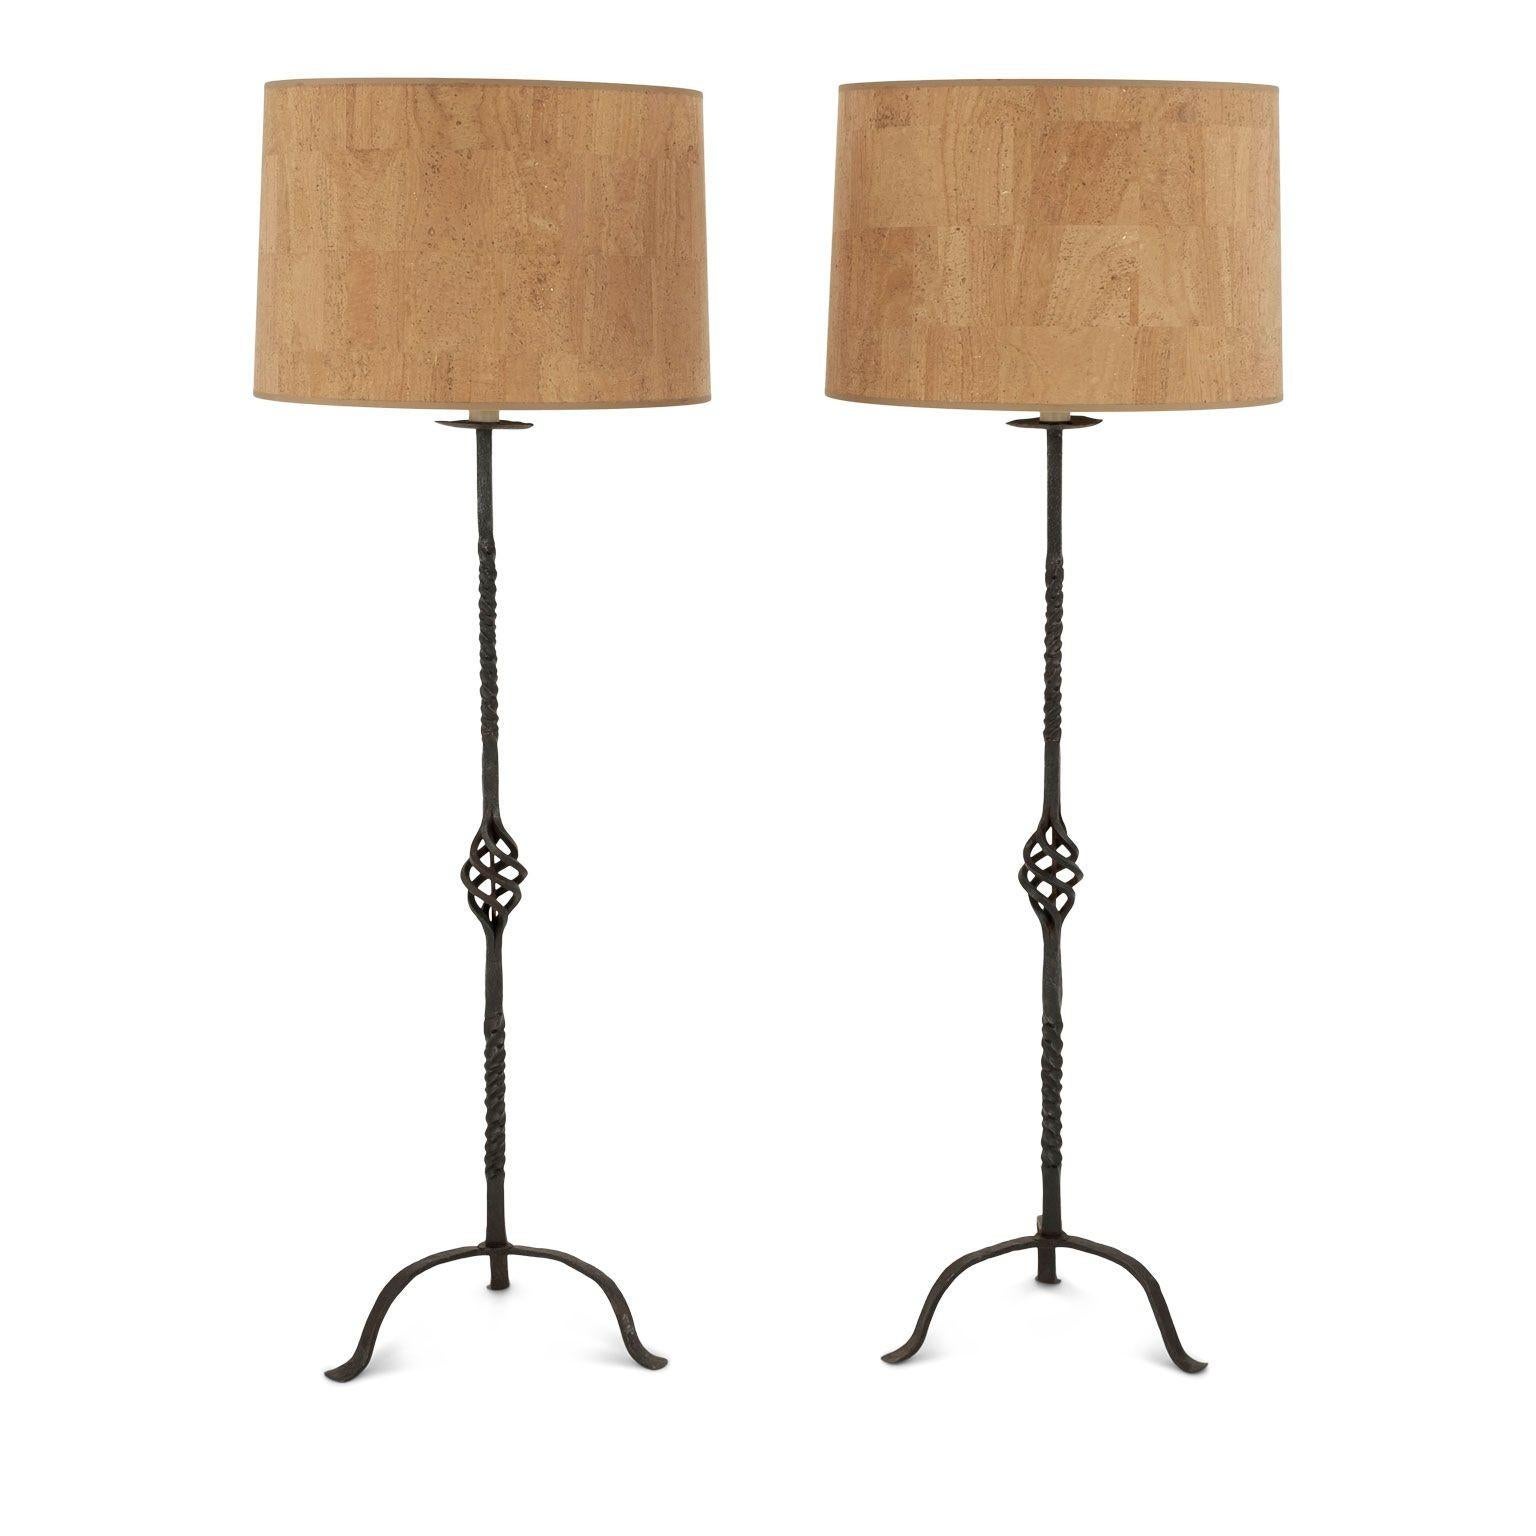 Wrought Iron Tall Lamps 2